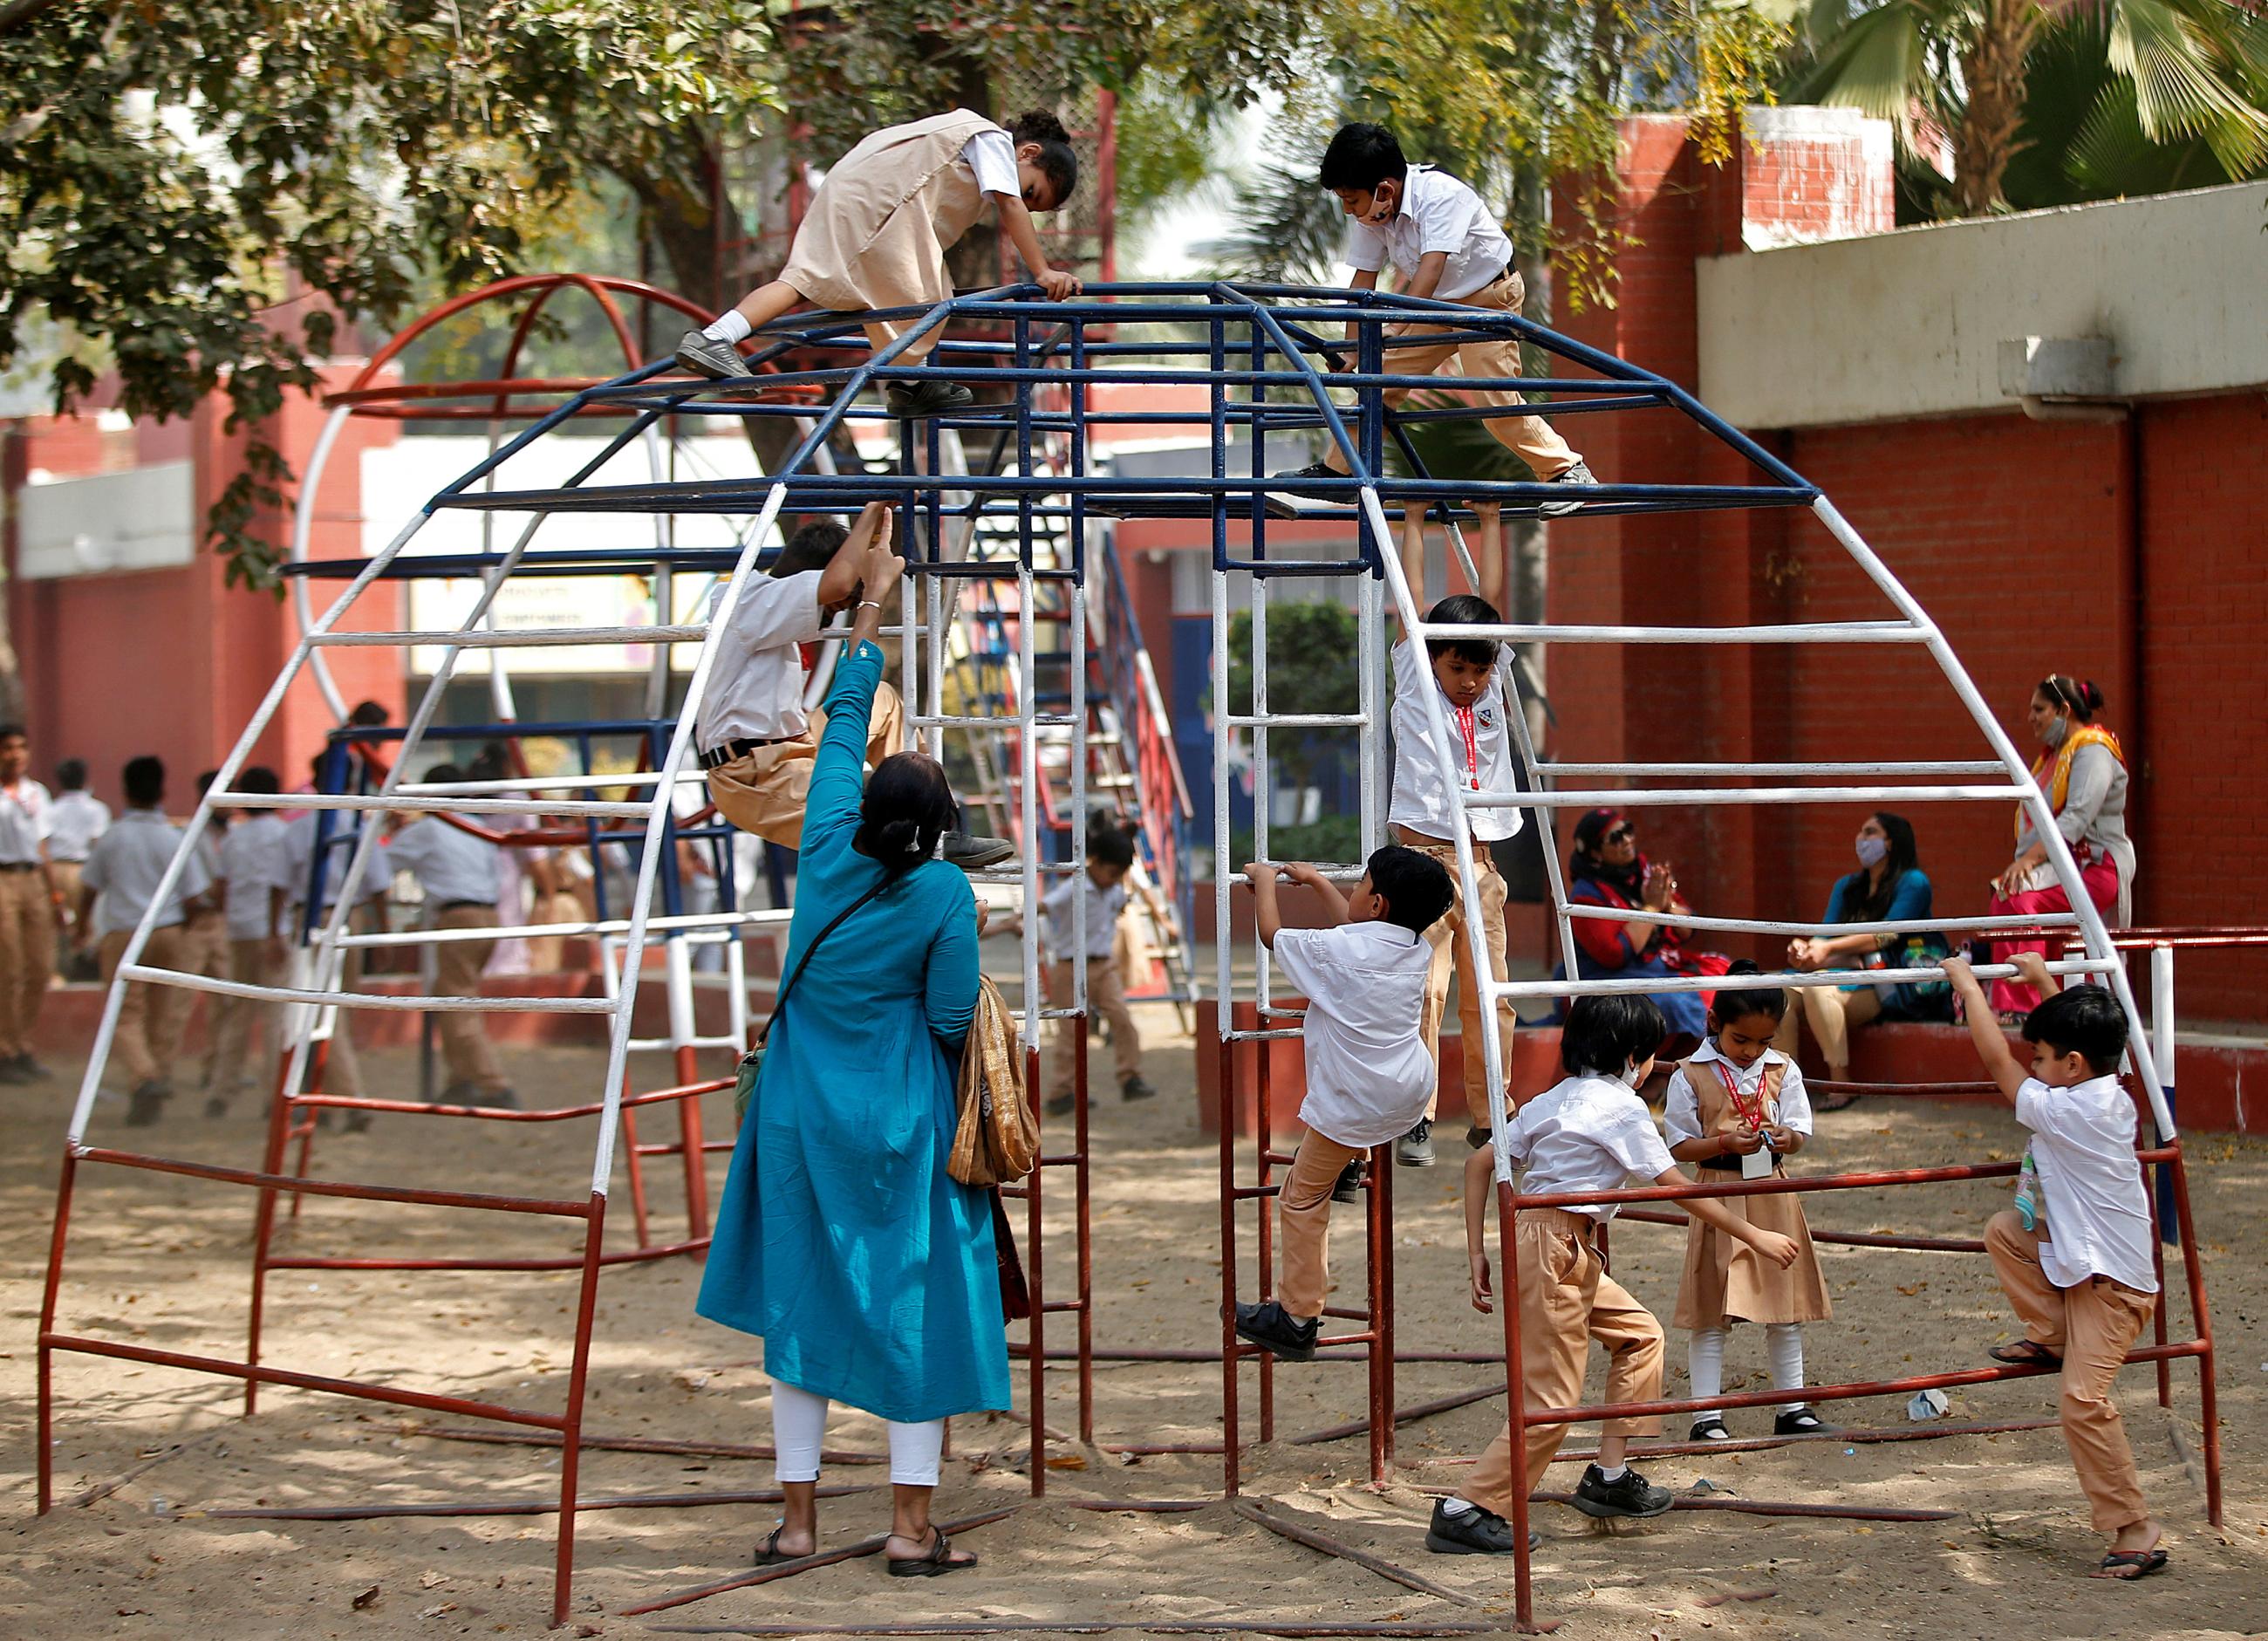 Students play during recess at a school.